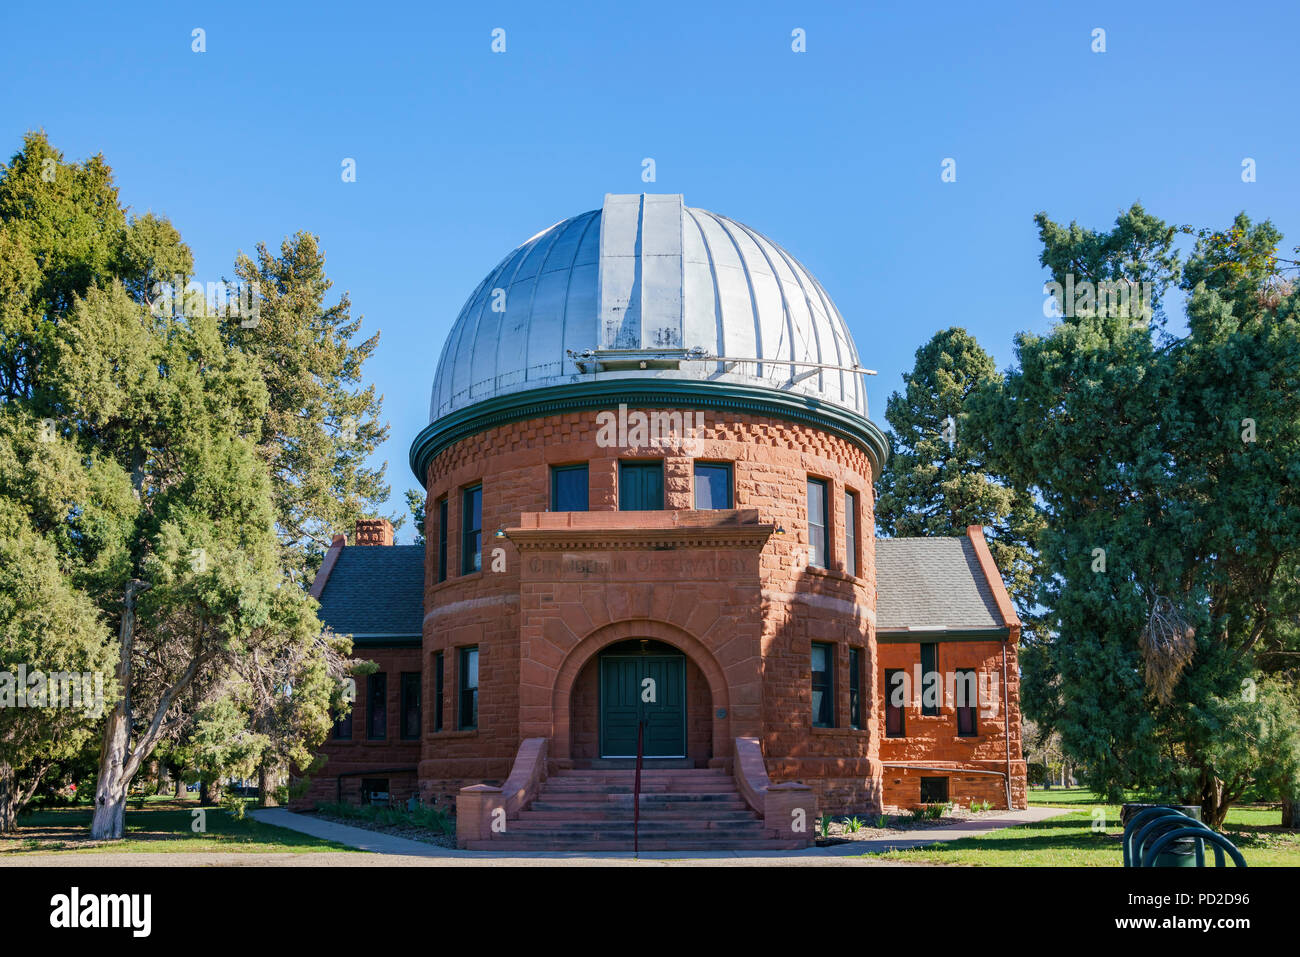 Exterior view of the Chamberlin Observatory at Denver, Colorado Stock Photo